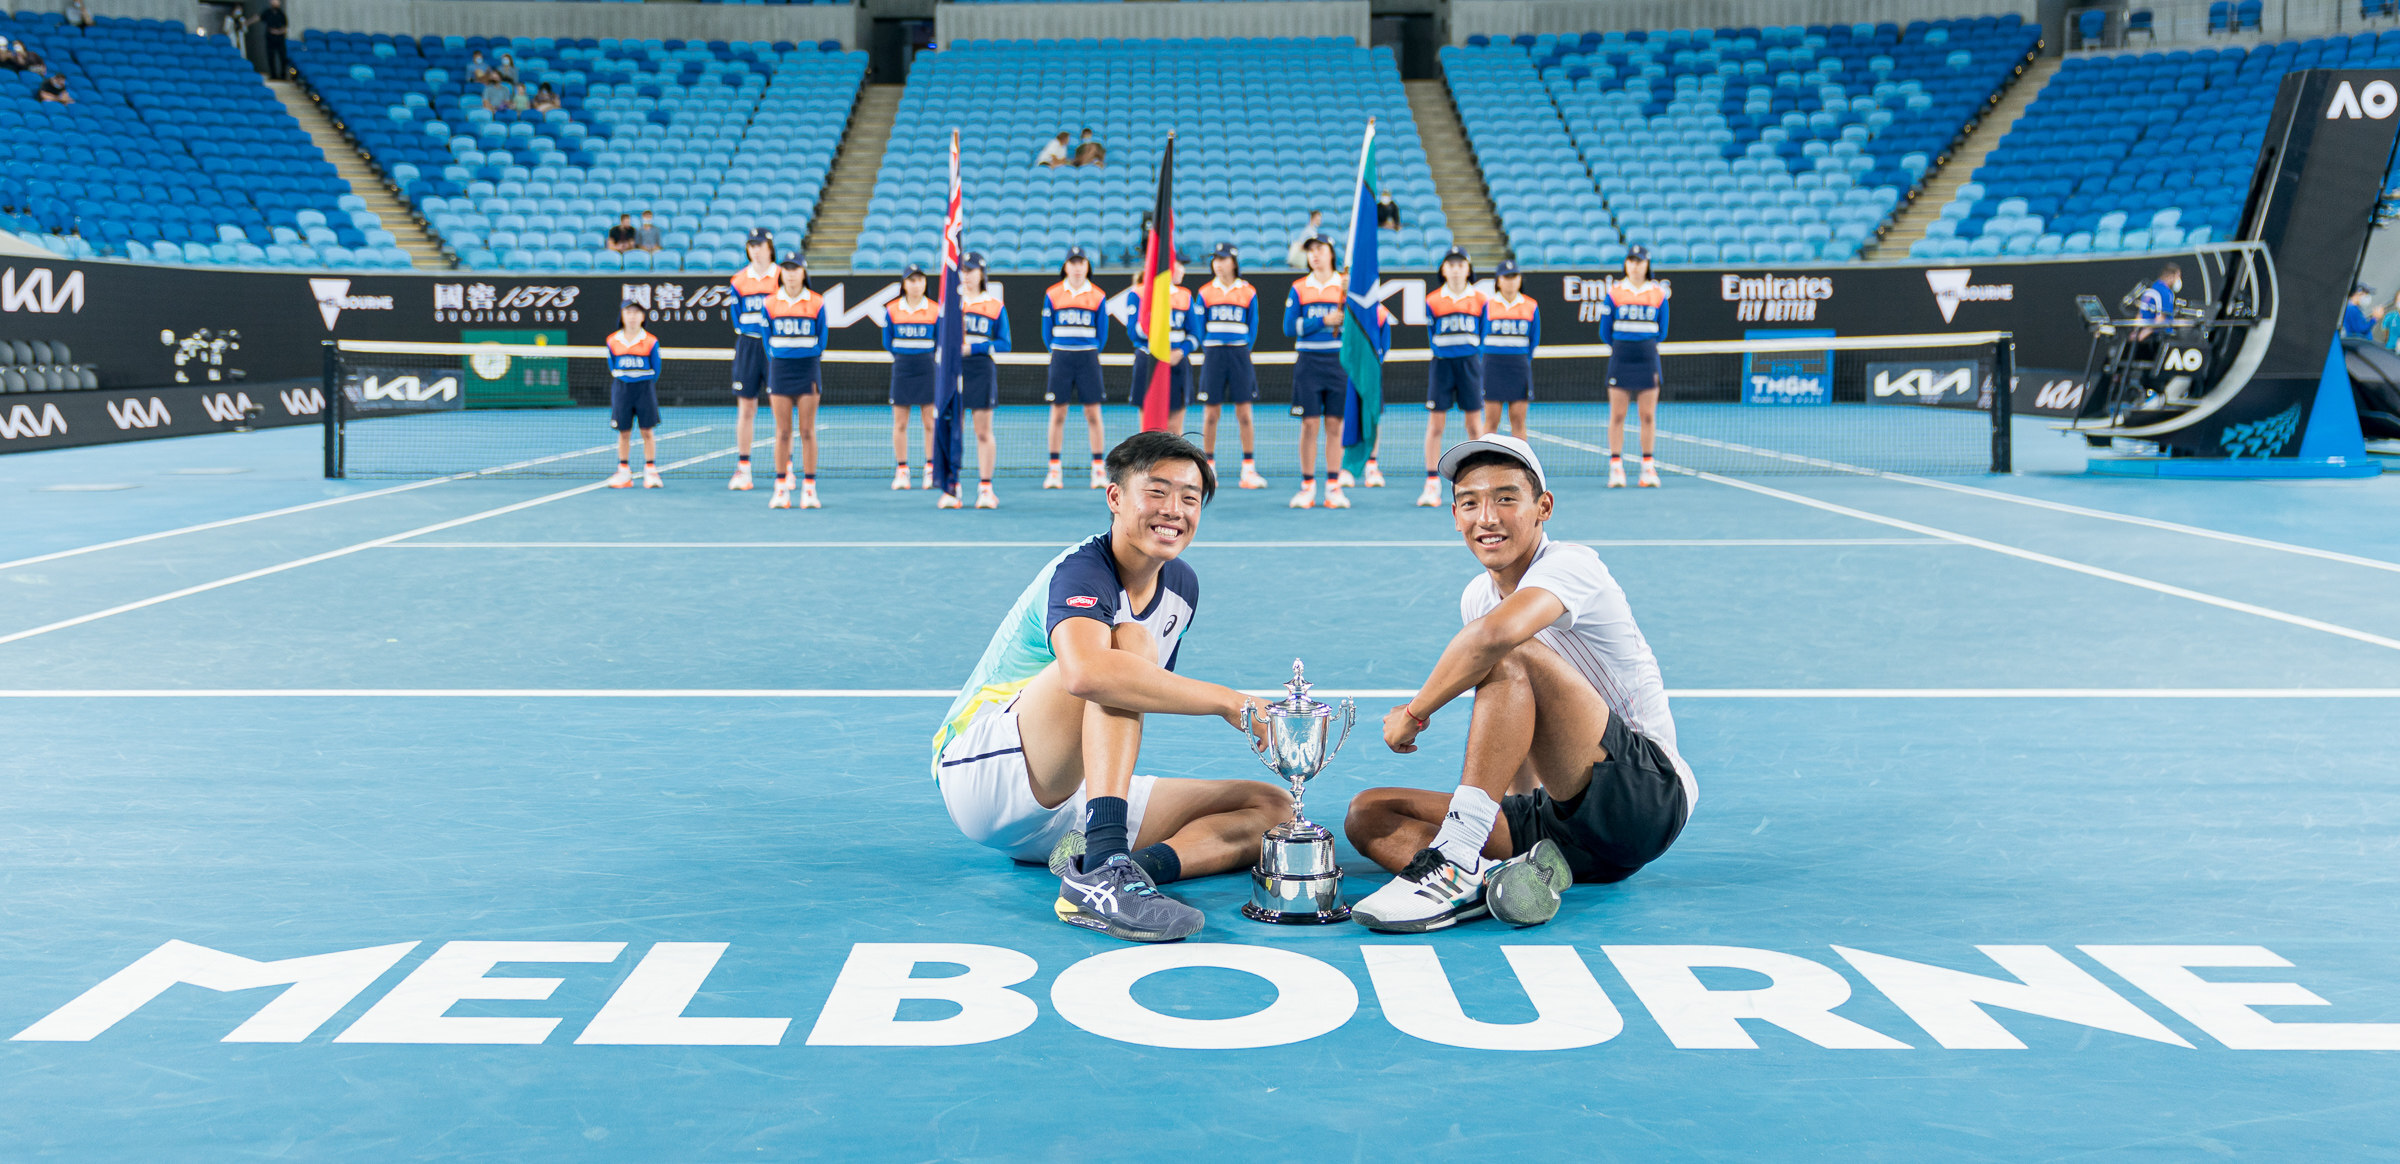 Hong Kong tennis player Coleman Wong Chak-lam (left) with partner Bruno Kuzuhara of the US after winning the Australian Open Junior Championship boys’ doubles final event in Melbourne. Photo: @arckphoto   